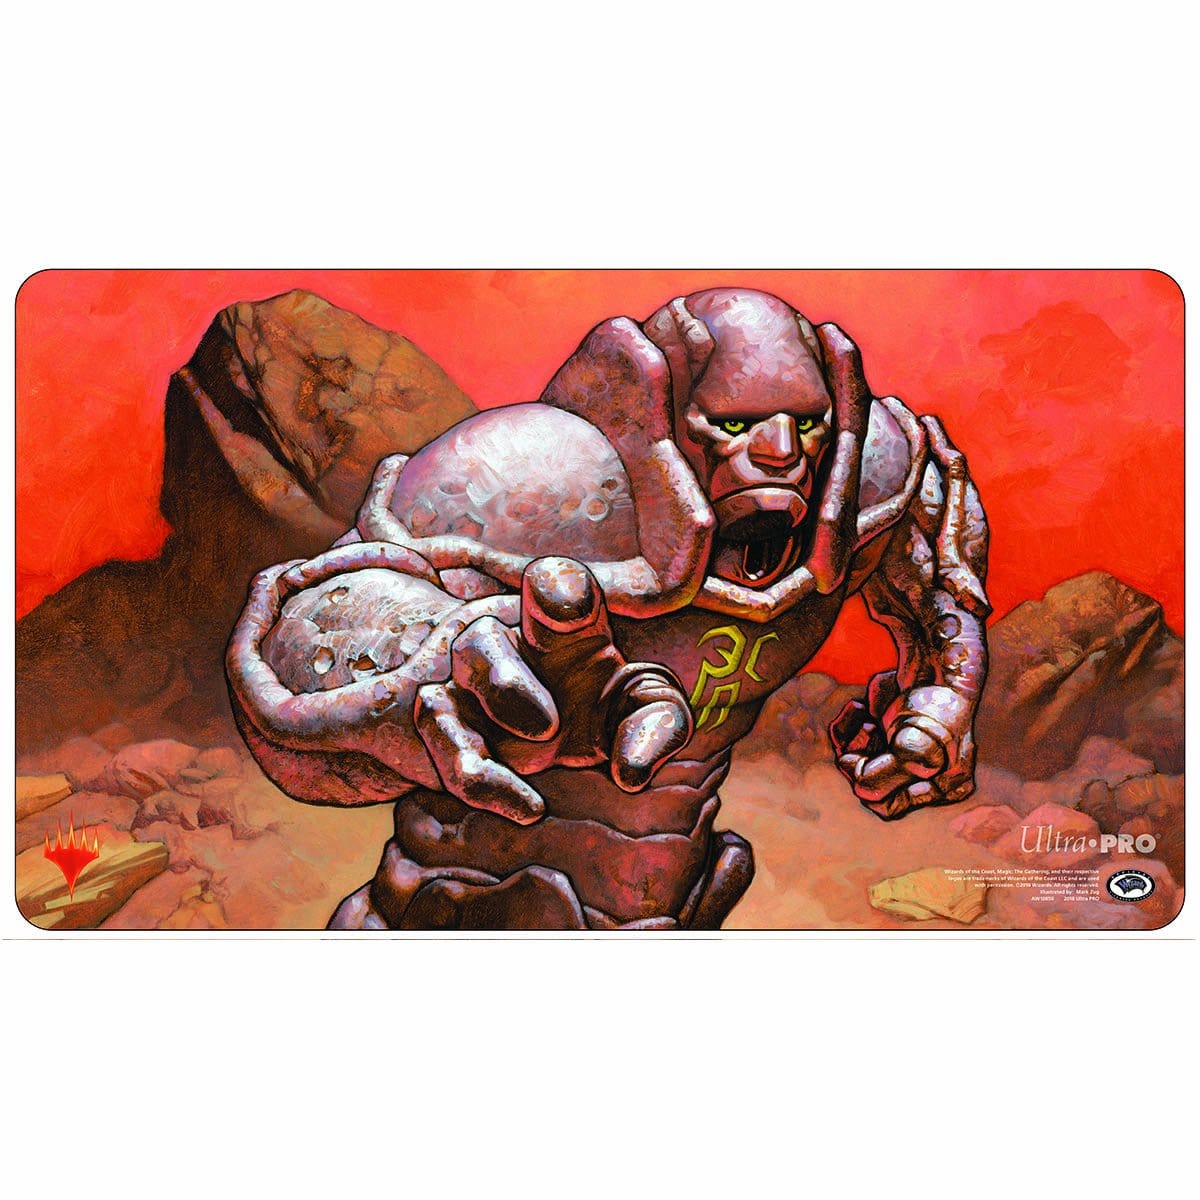 Karn, Silver Golem Playmat - Playmat - Original Magic Art - Accessories for Magic the Gathering and other card games